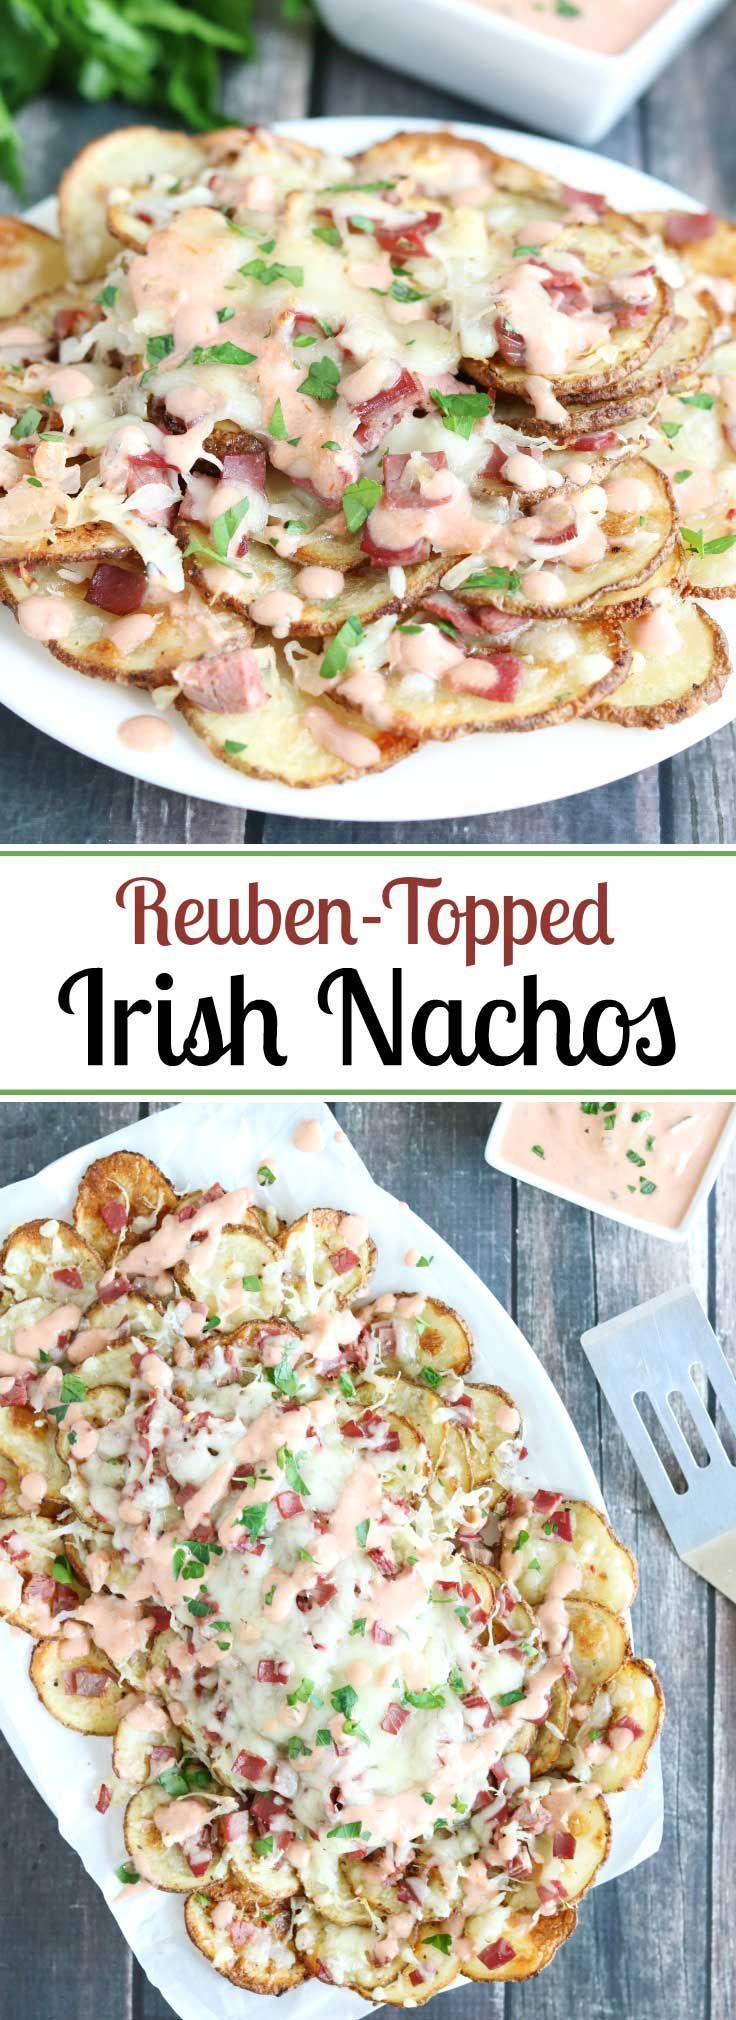 Seasoned, oven-baked potato chips and classic reuben toppings! These Reuben-Topped Irish Nachos feature all the ever-popular